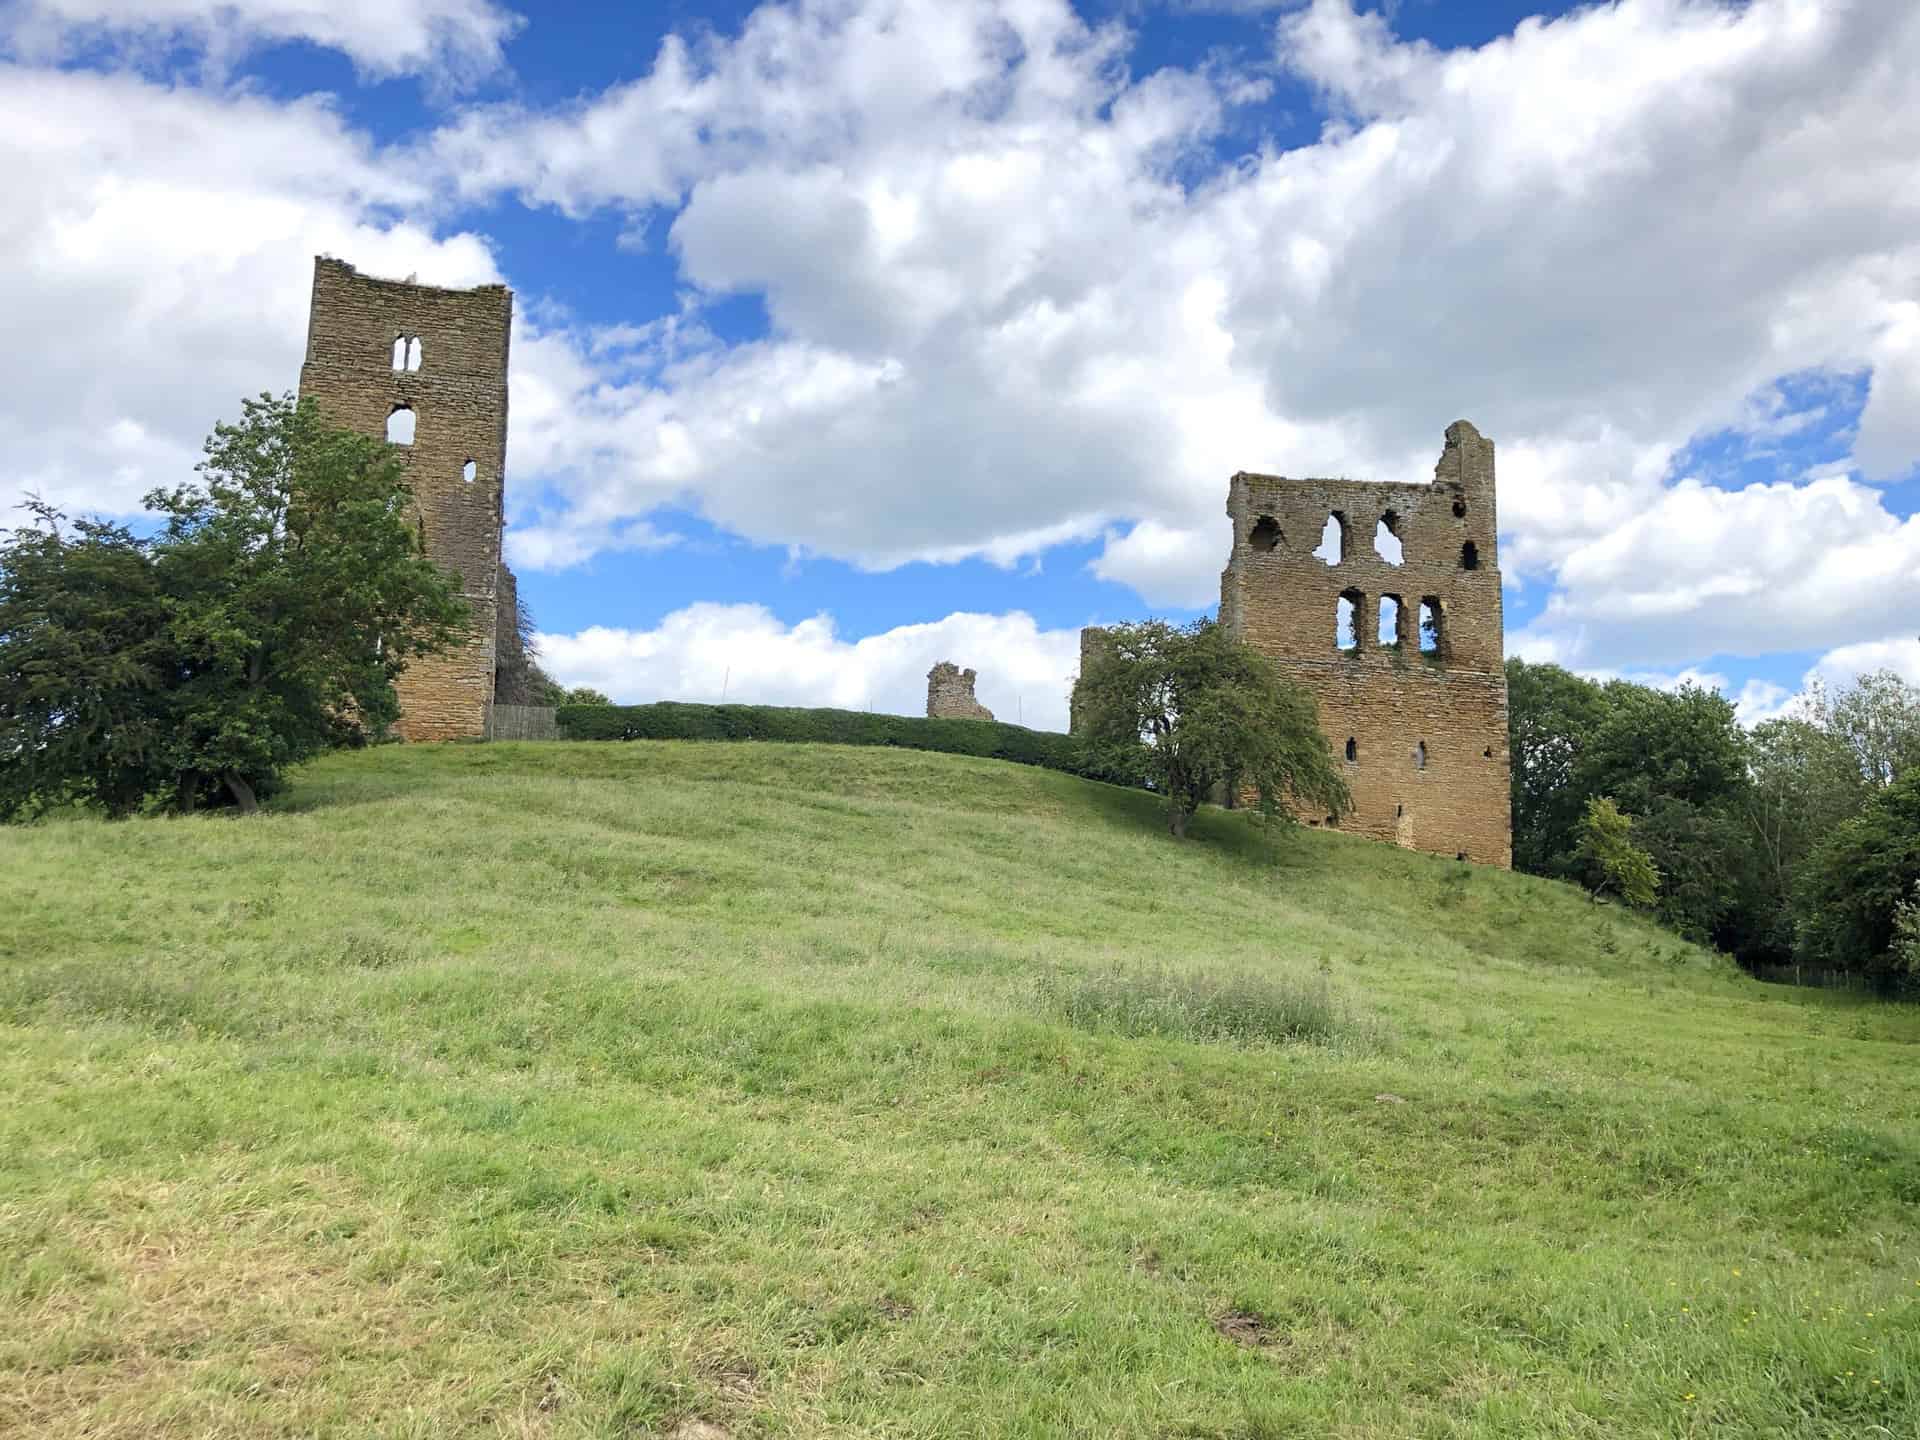 The origins of Sheriff Hutton Castle can be traced back to the reign of King Stephen (circa 1135-1154), when Bertram de Bulmer, Sheriff of York, built a motte and bailey castle in the Forest of Galtres. The castle can be seen on this Sheriff Hutton walk.